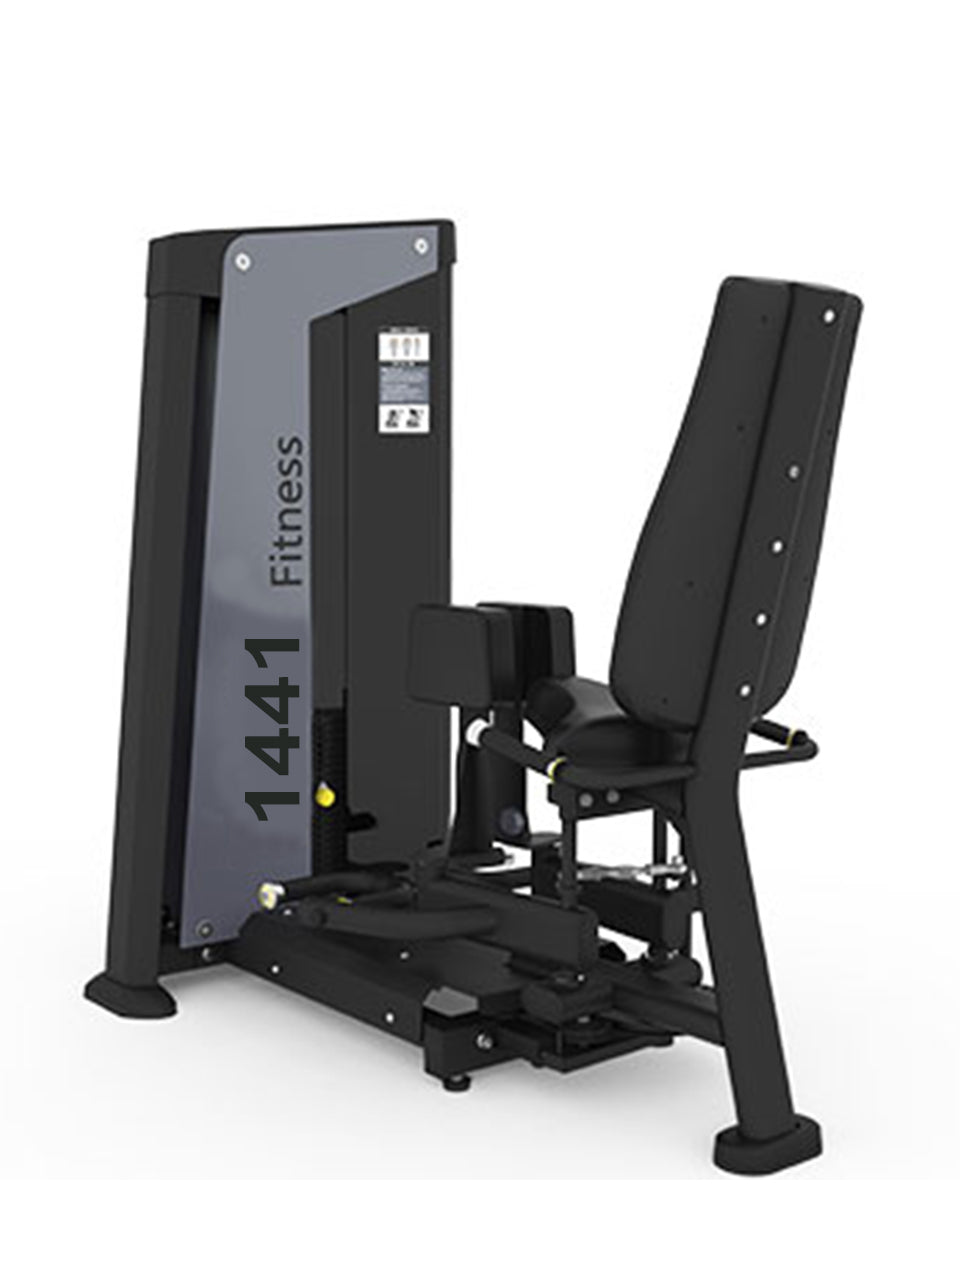 1441 Fitness Abductor/ Adductor Trainer - 41FFH25